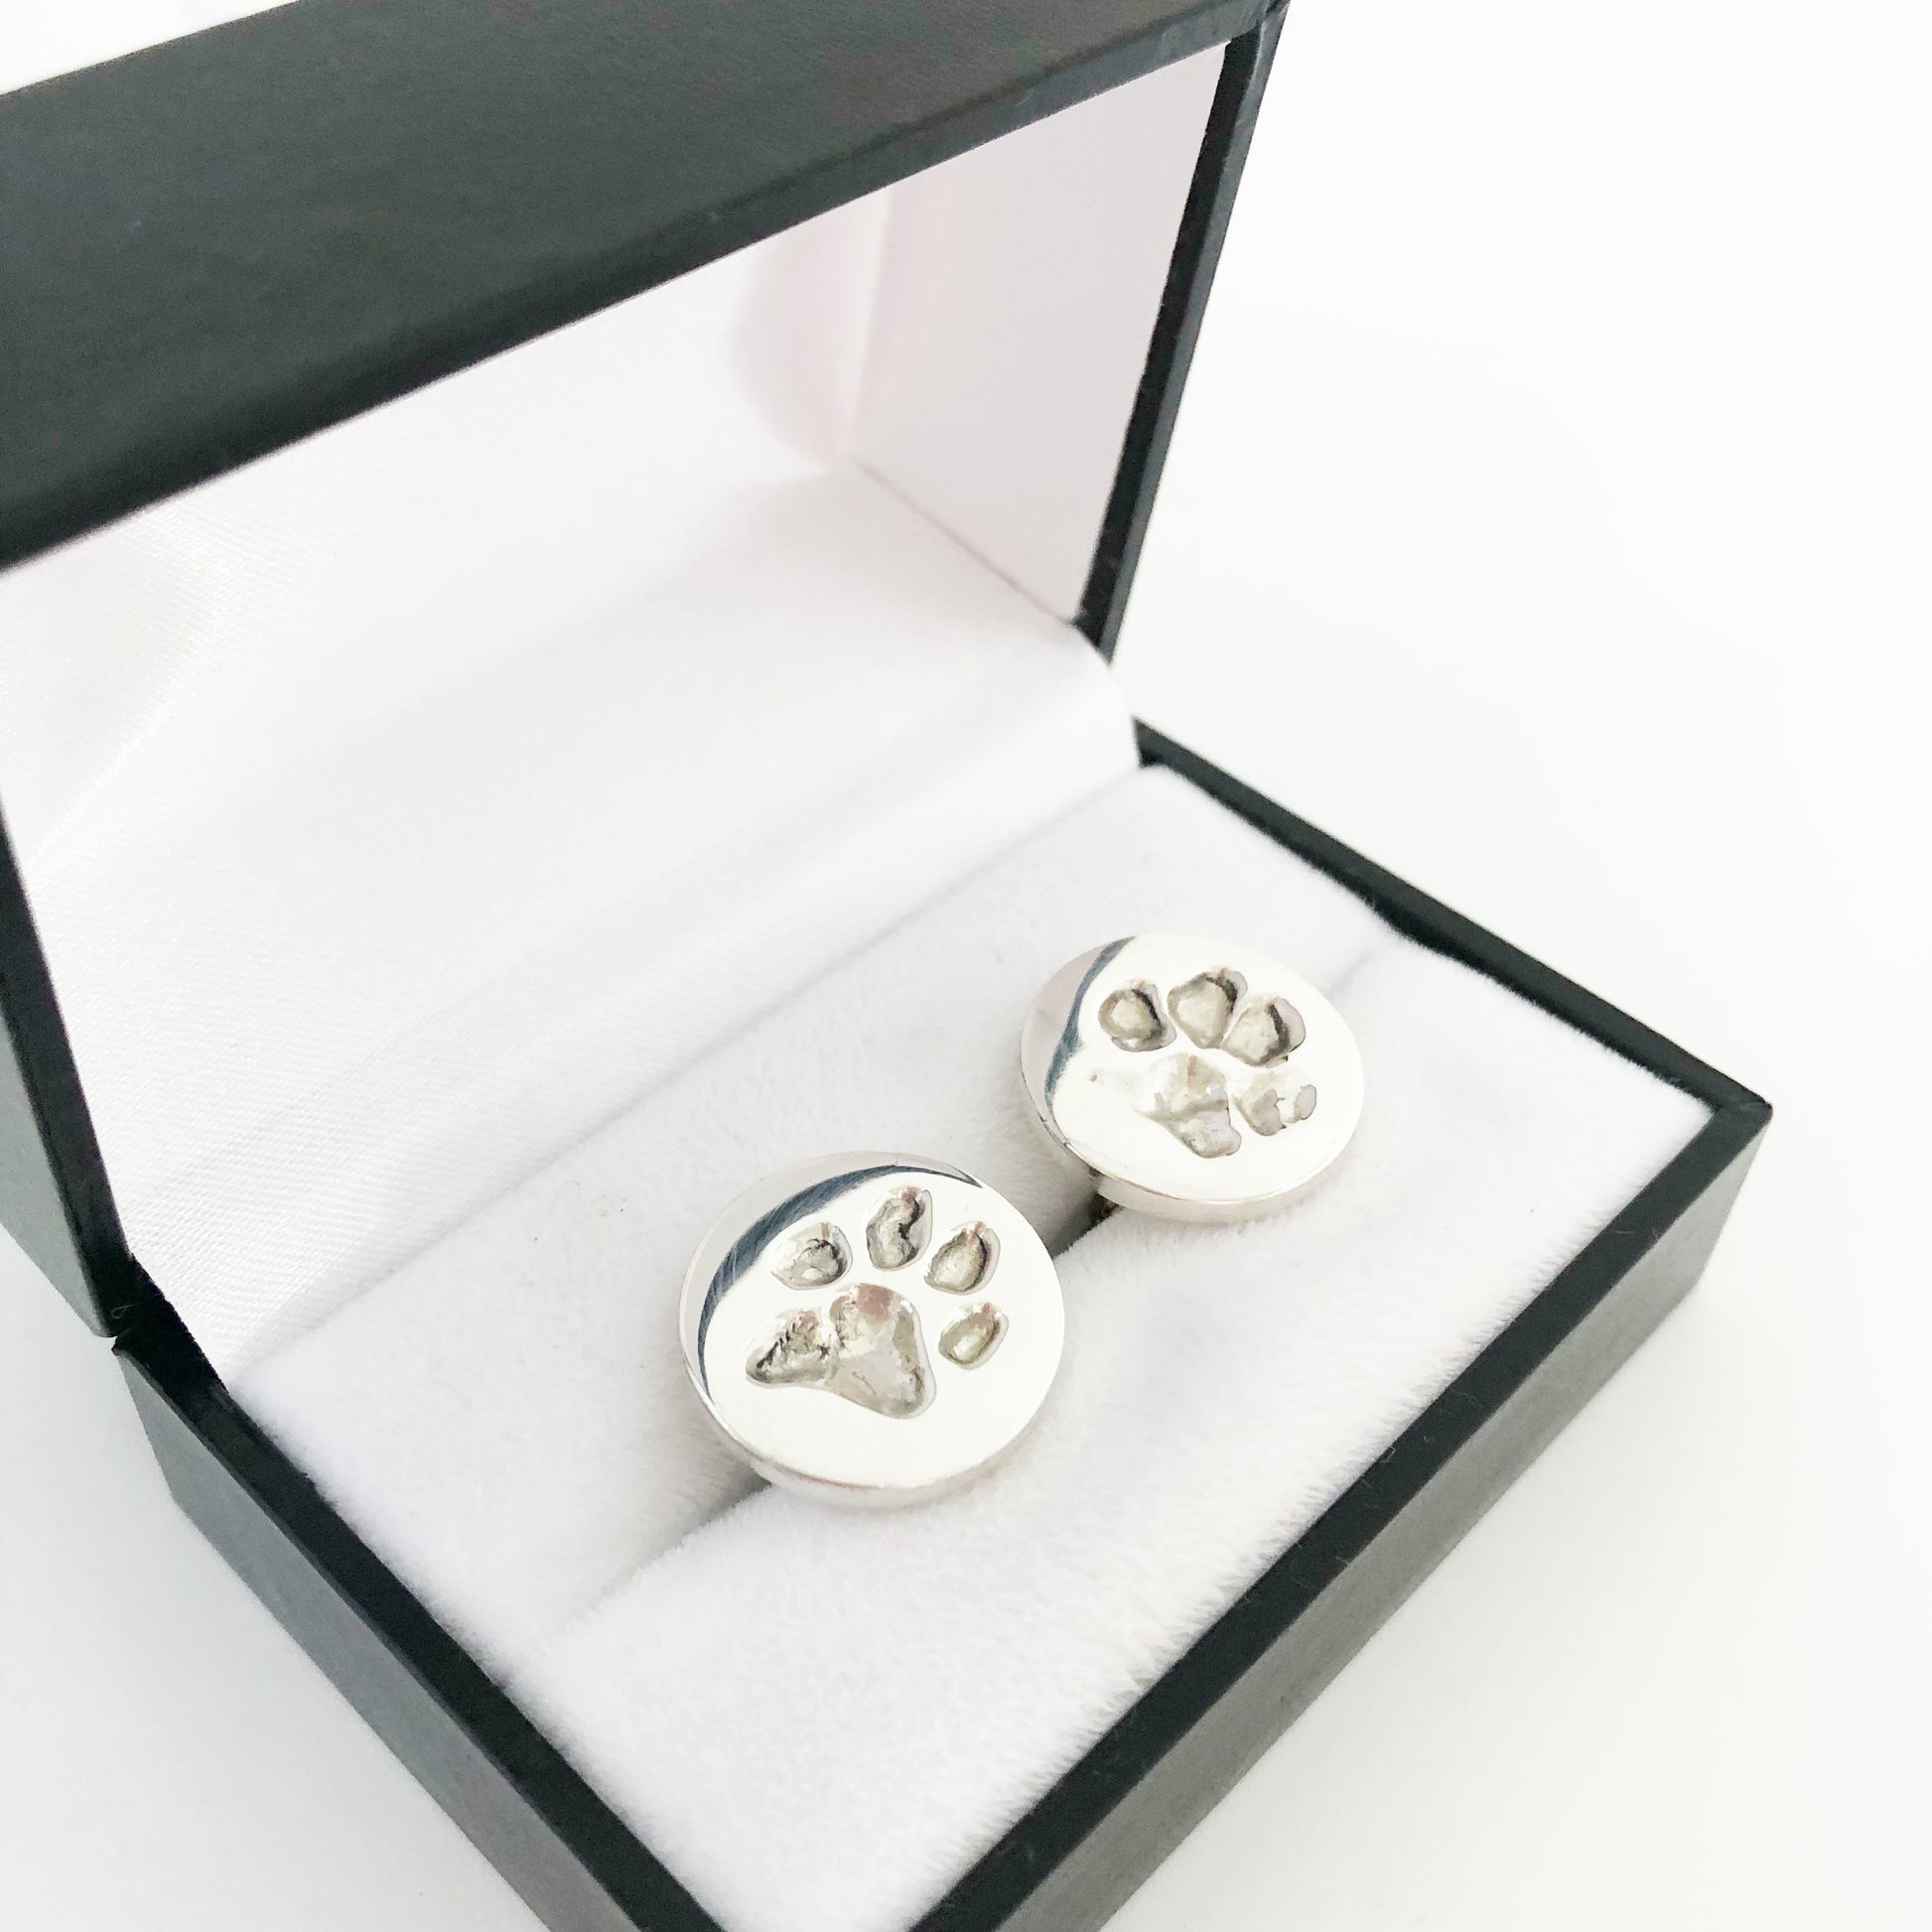 Pet Cufflinks with actual paw prints